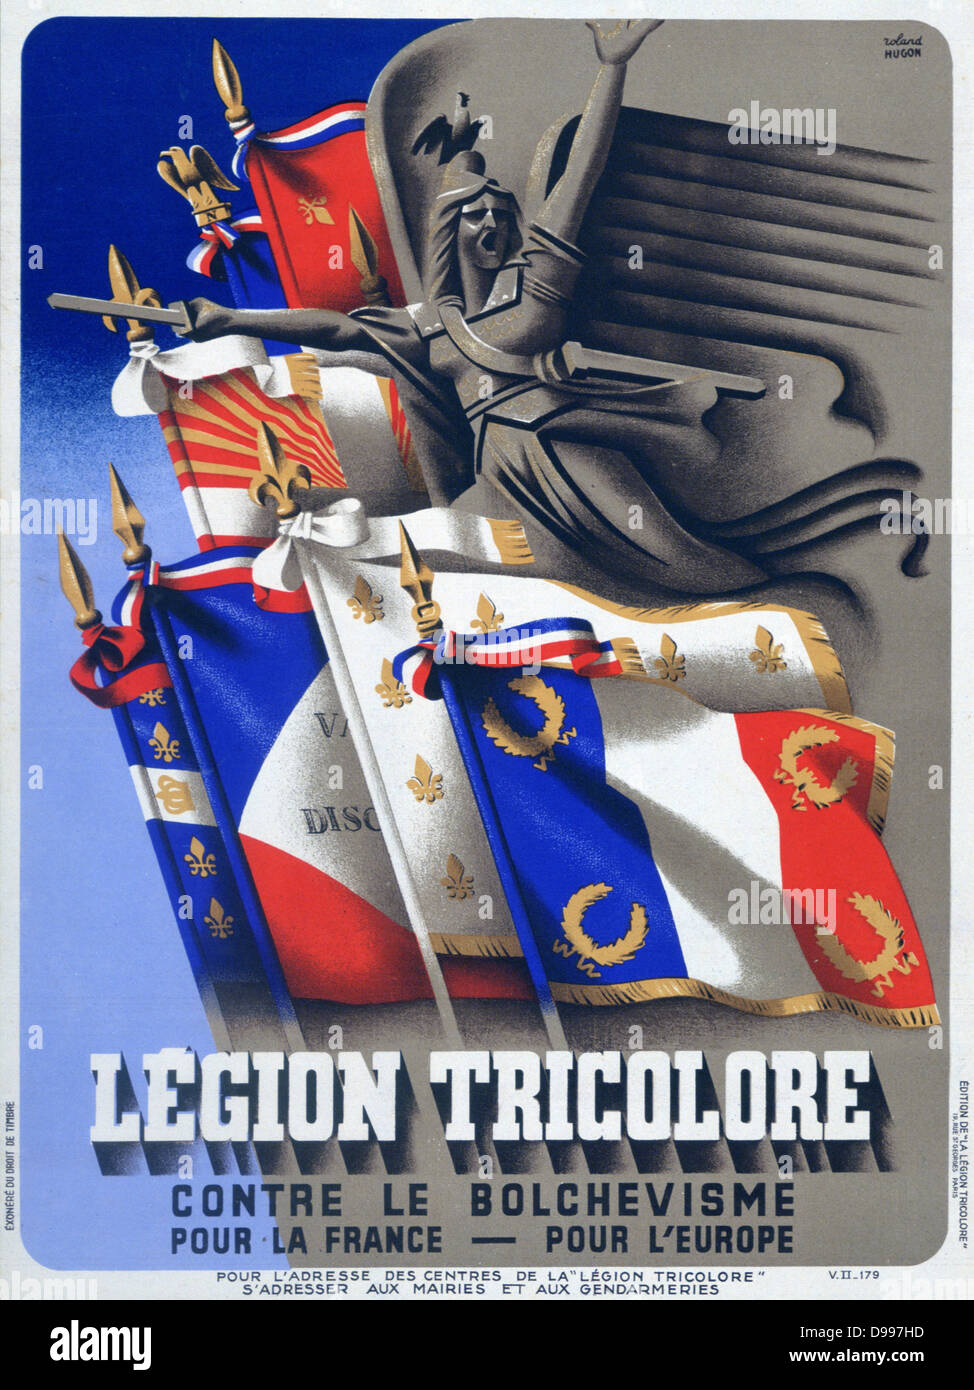 Poster for the Legion Tricolore, an unsuccessful Vichy government attempt between July to October 1942 to create a fighting unit of French collaborators and volunteers independent of the Germans. World War II, France, Military Stock Photo